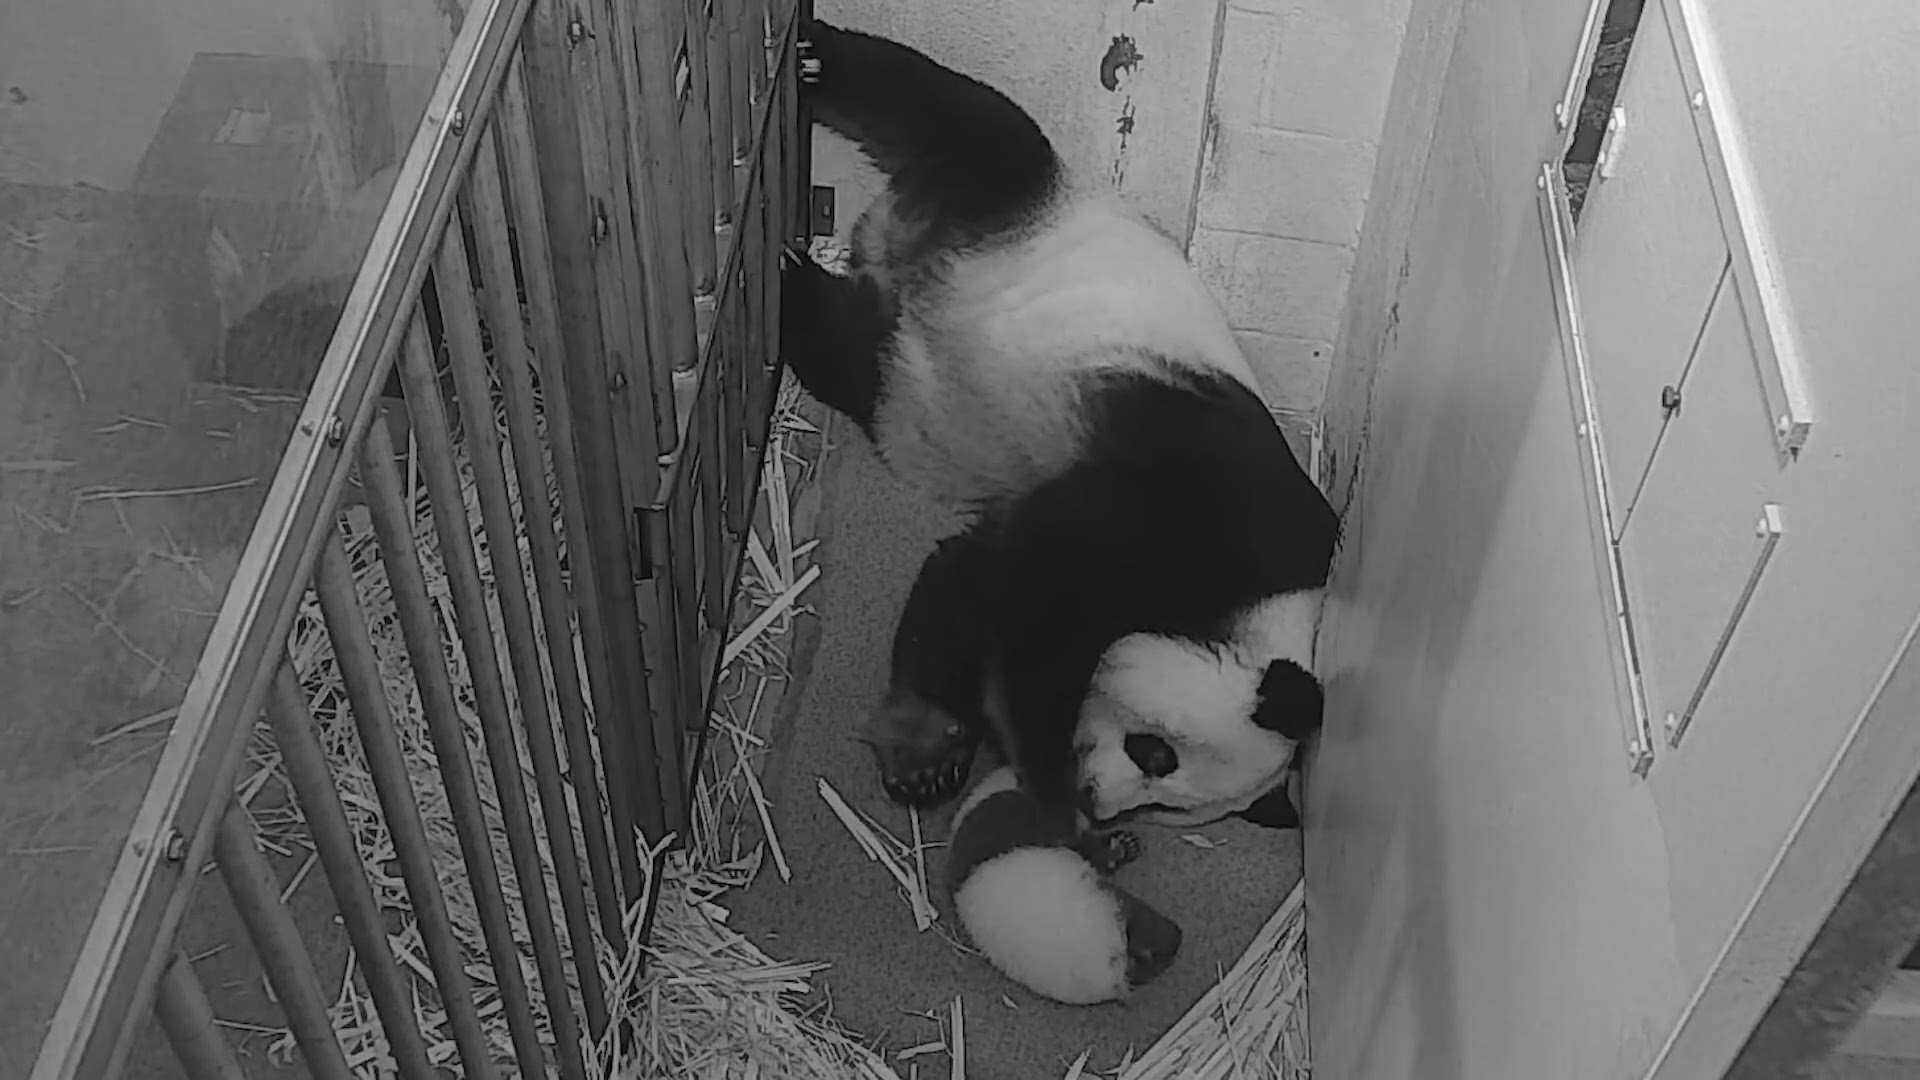 Our little man, who doesn’t’ have a name yet, is a bit of a miracle baby being that mother Mei had less than a 1% chance of getting pregnant due to her age.